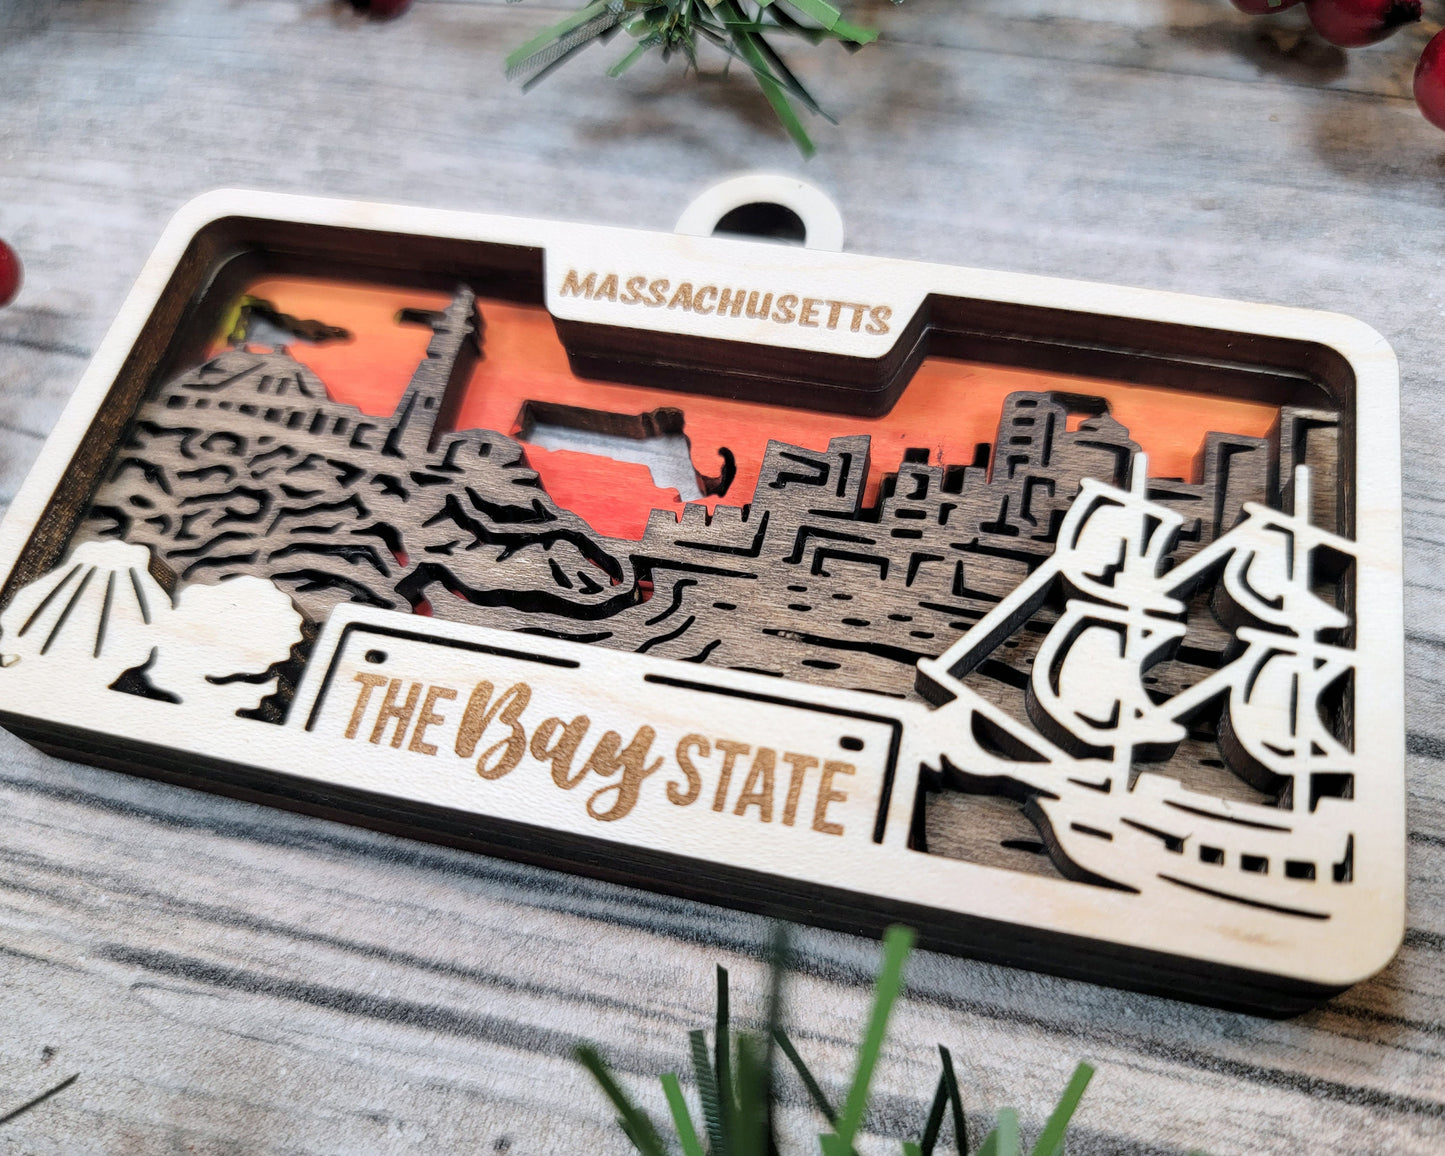 Massachusetts State Plate Ornament and Signage - SVG File Download - Sized for Glowforge - Laser Ready Digital Files